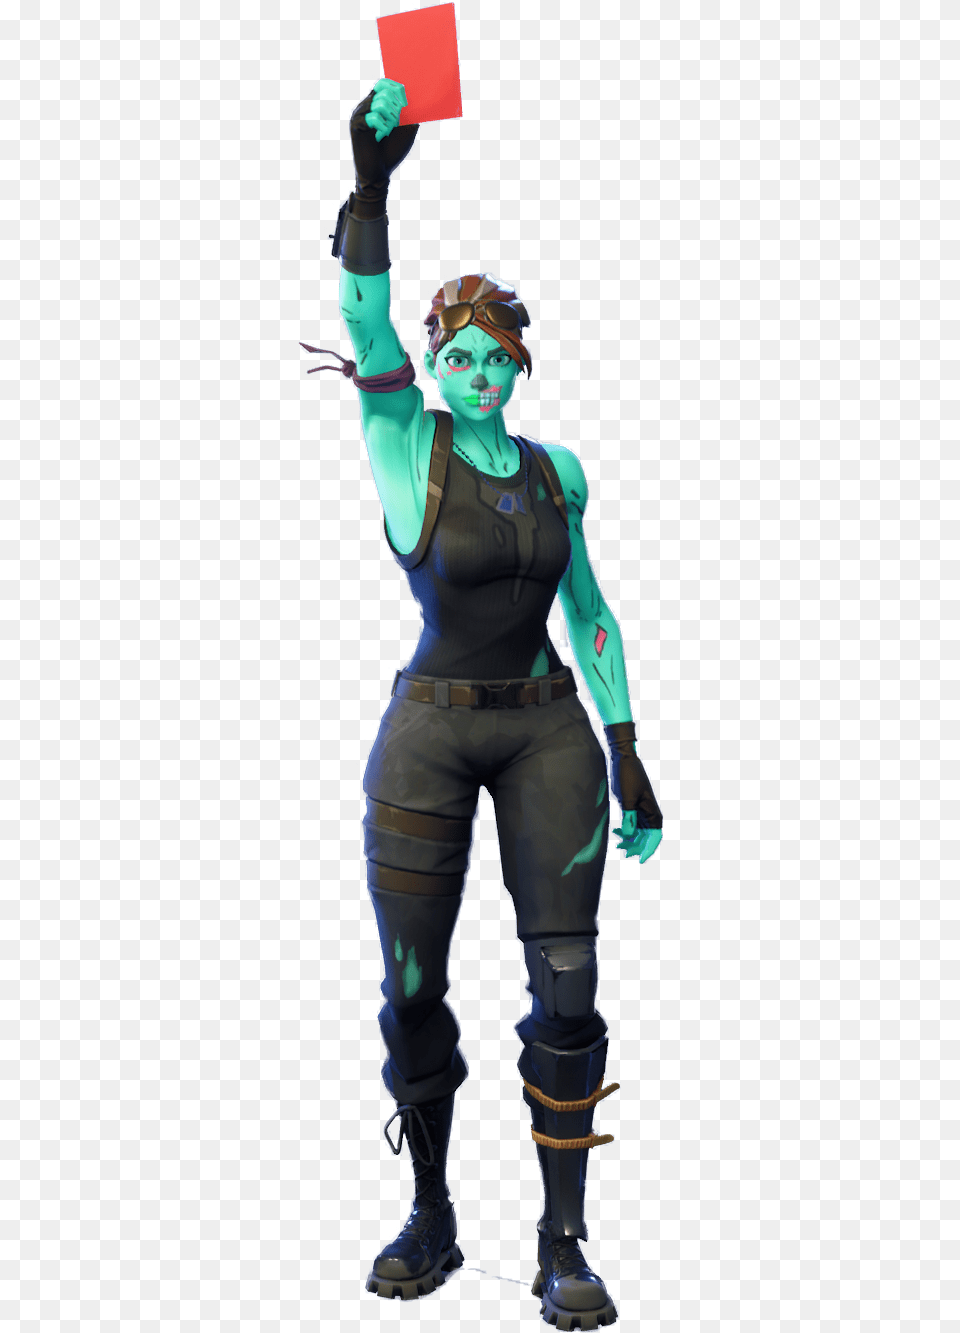 Uncommon Red Card Emote Fortnite Cosmetic Cost 200 Fortnite Ghoul Trooper Emote, Person, Face, Head, Clothing Free Png